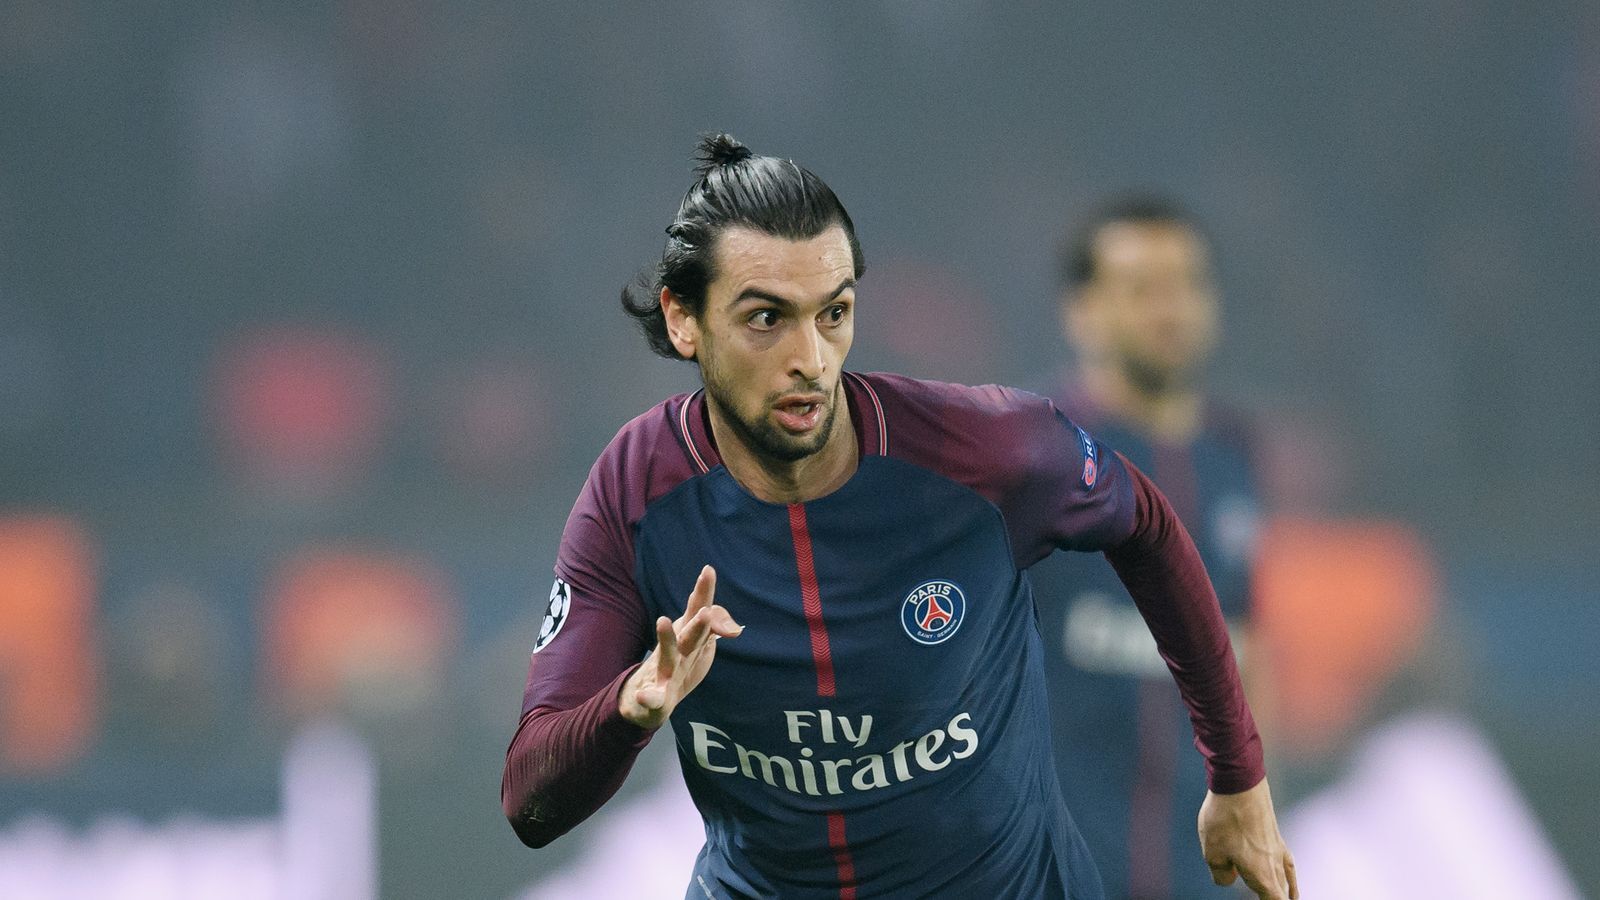 Pastore Admits to Not Having the Right Mindset to Be the Best